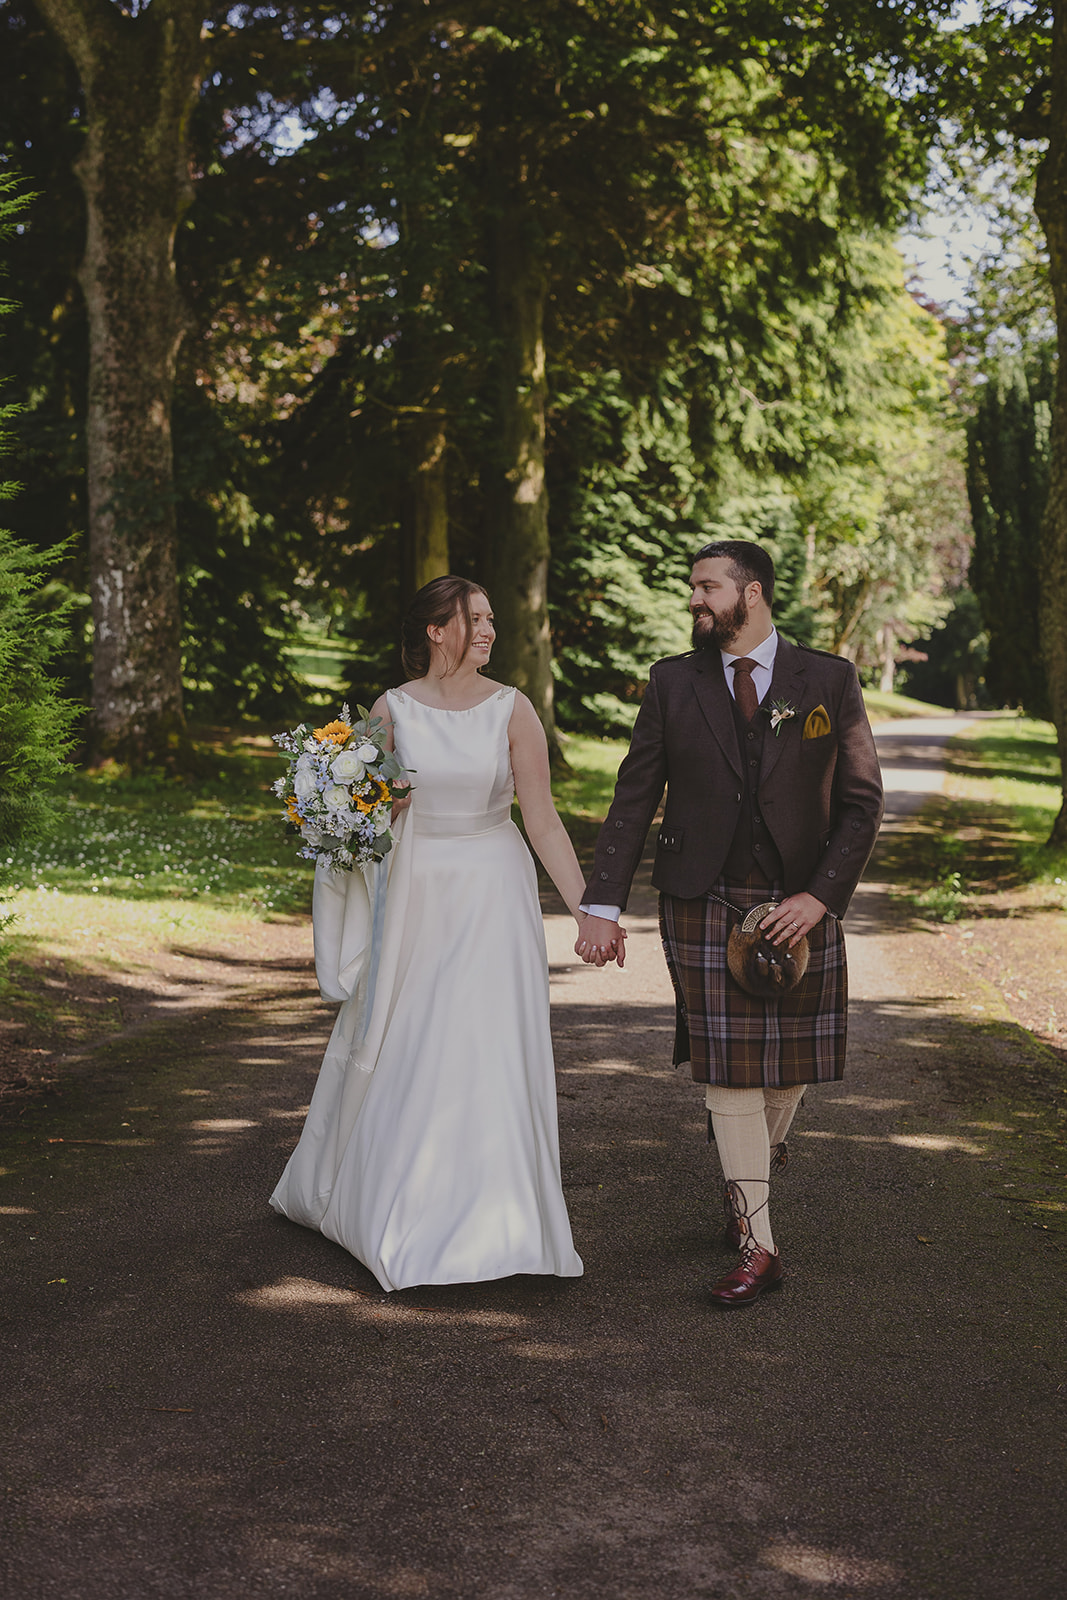 A bride and groom walking hand in hand around the grounds of Elsick House on their wedding day in Scotland.